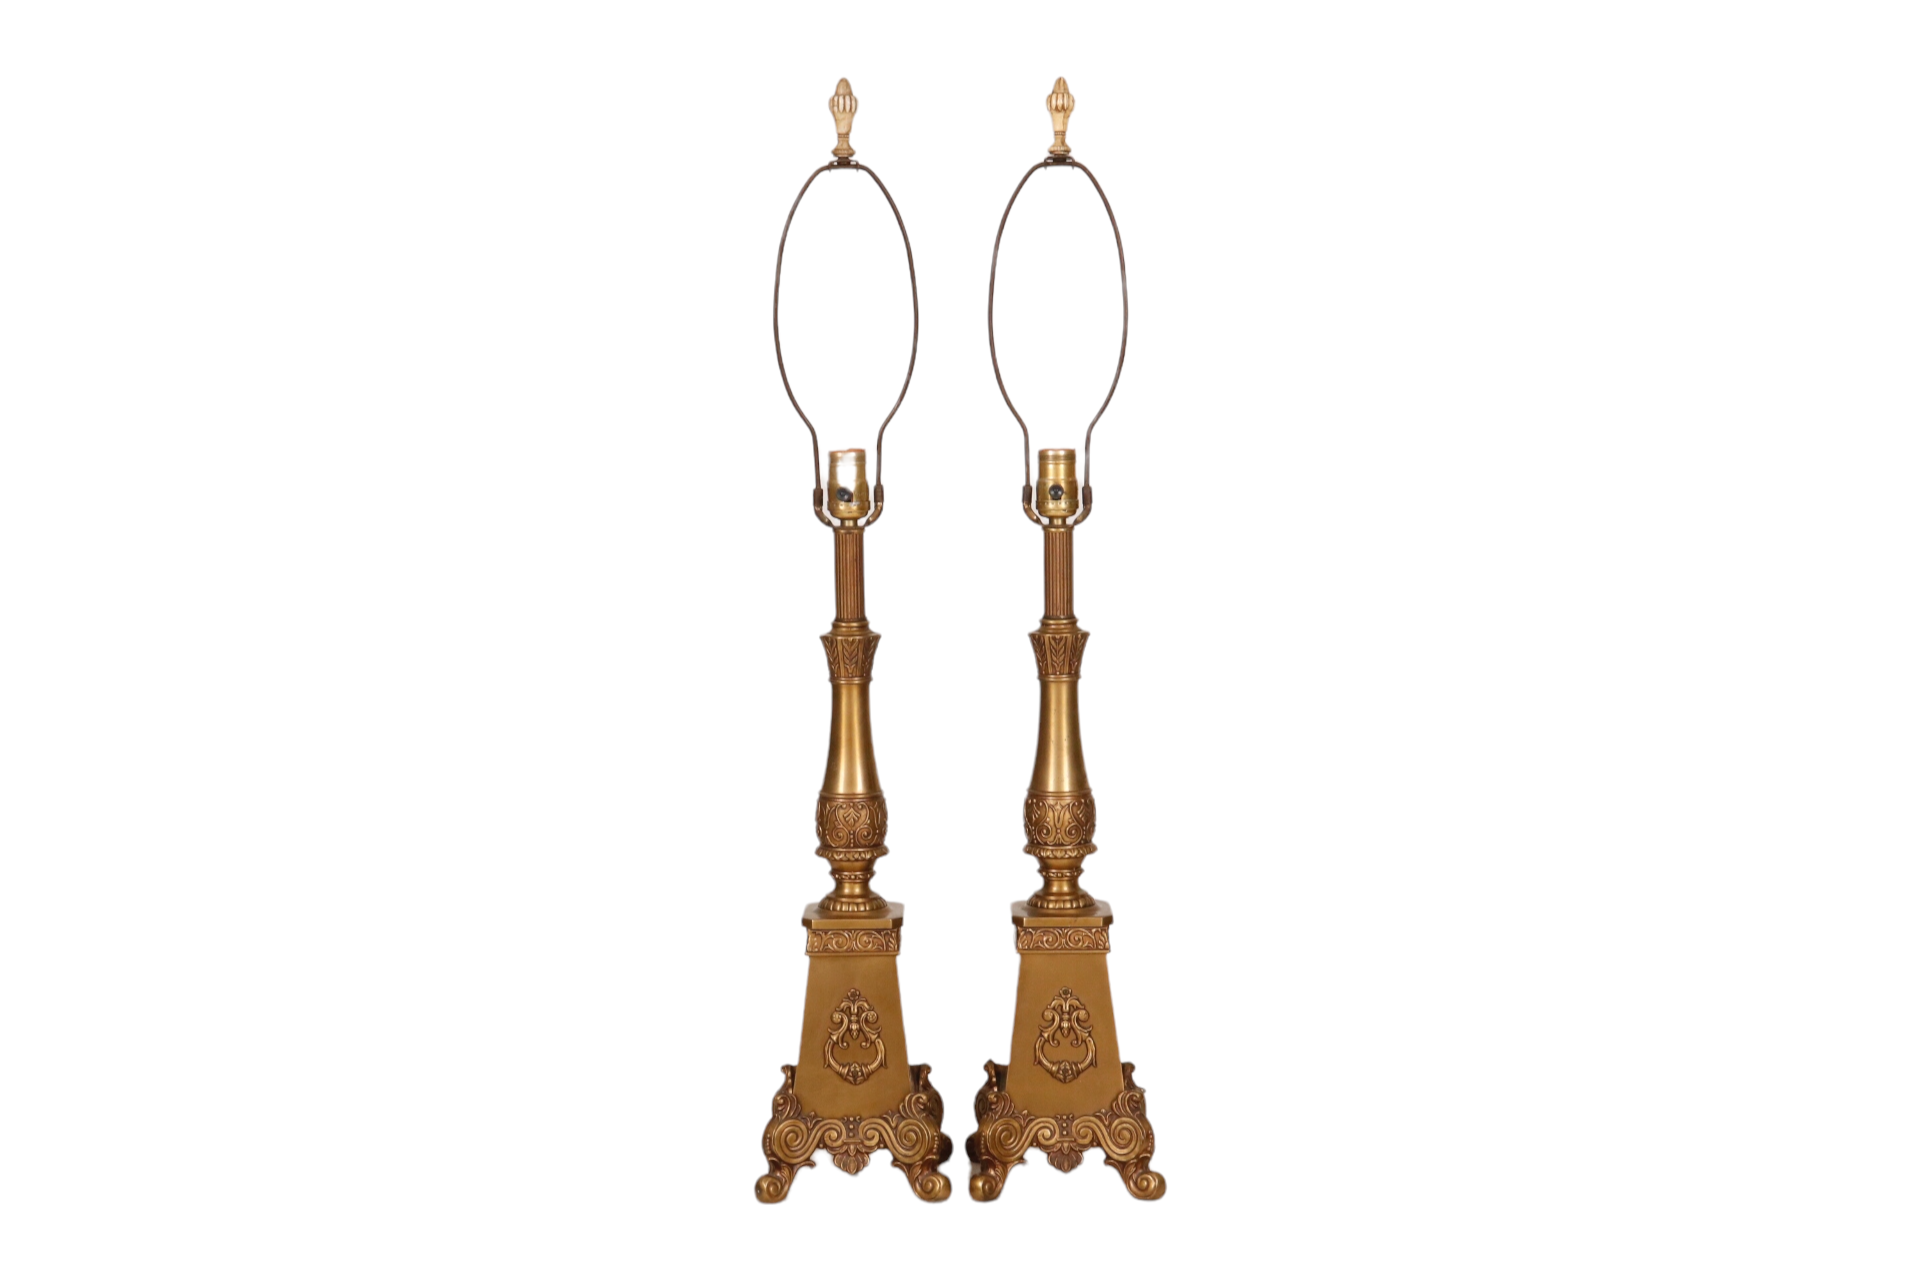 French Regency Style Table Lamps, a Pair~P77659207